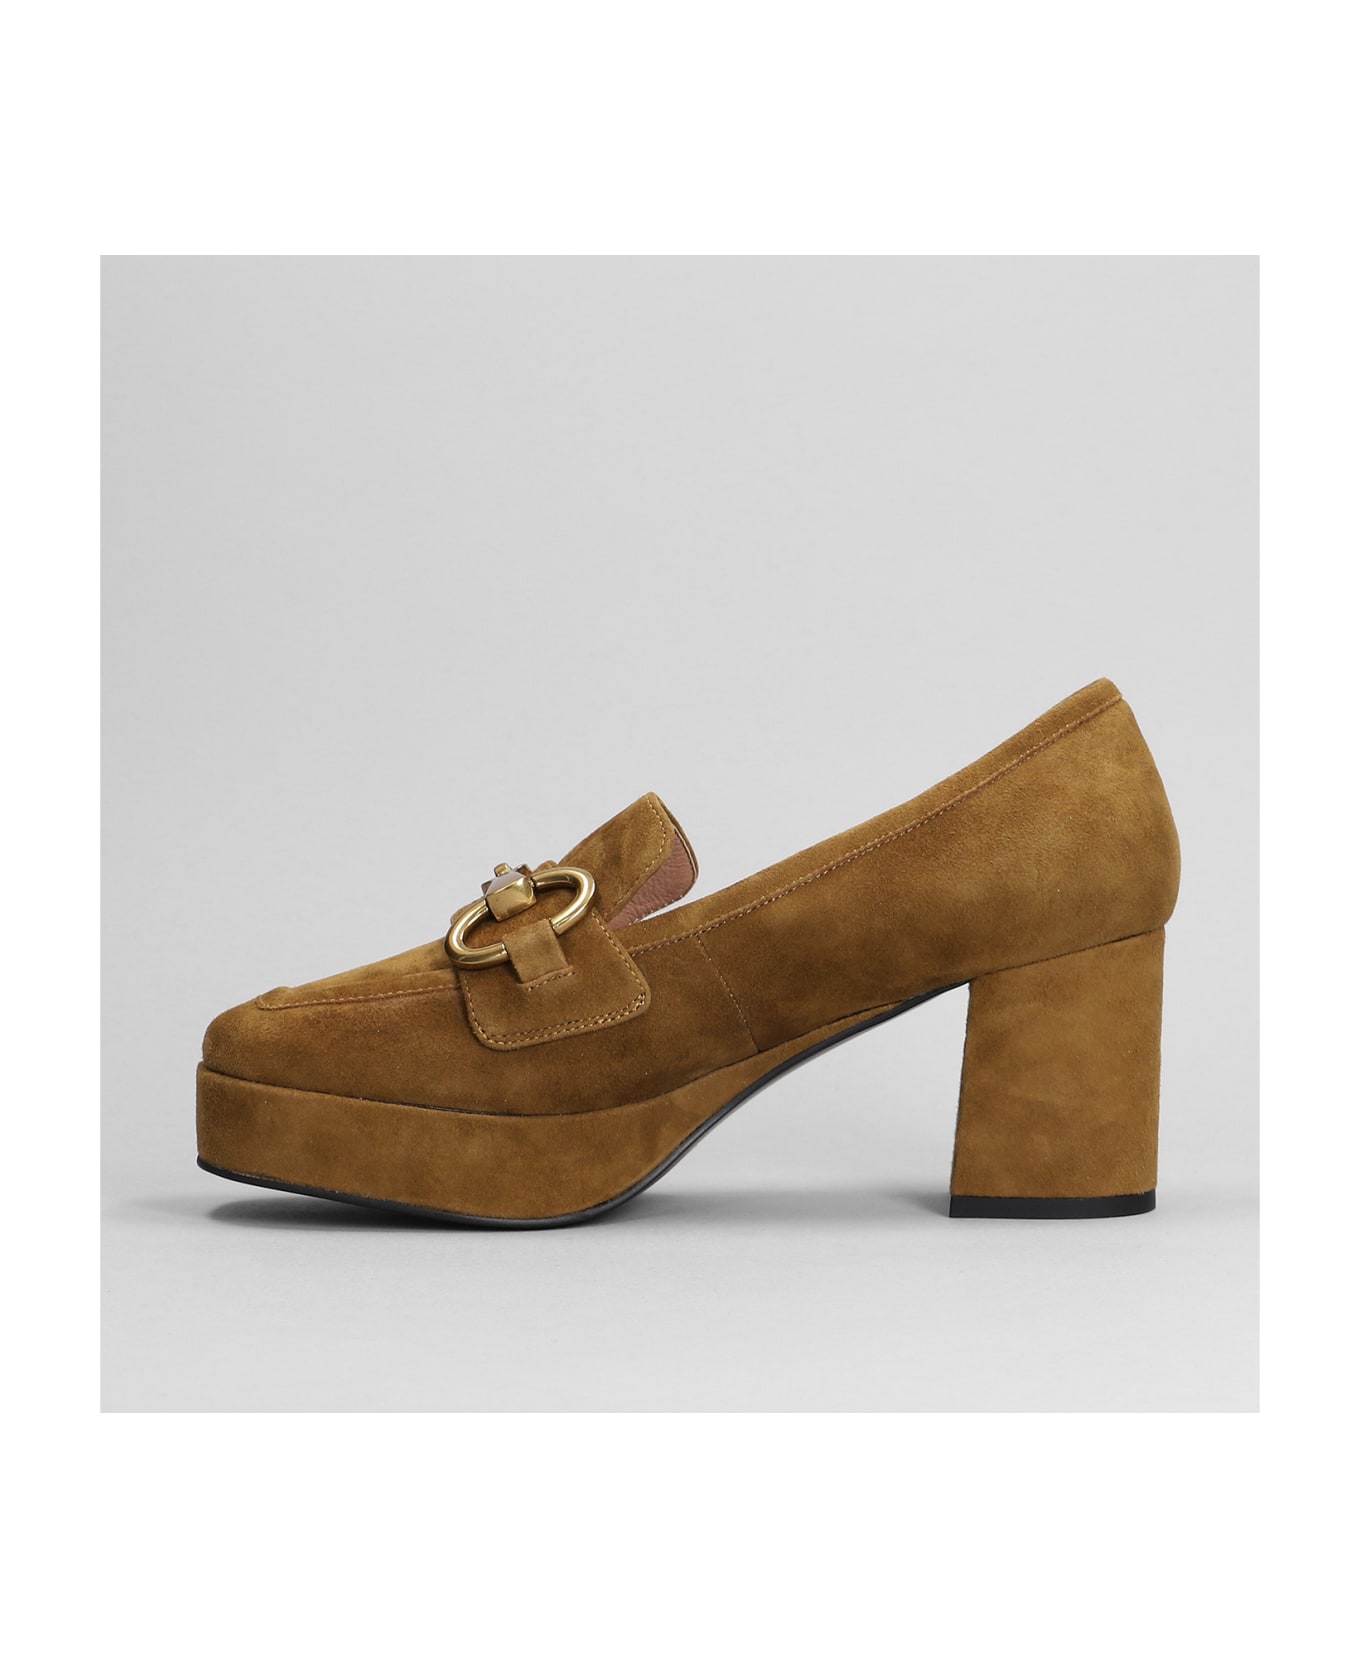 Bibi Lou Pumps In Leather Color Suede - leather color